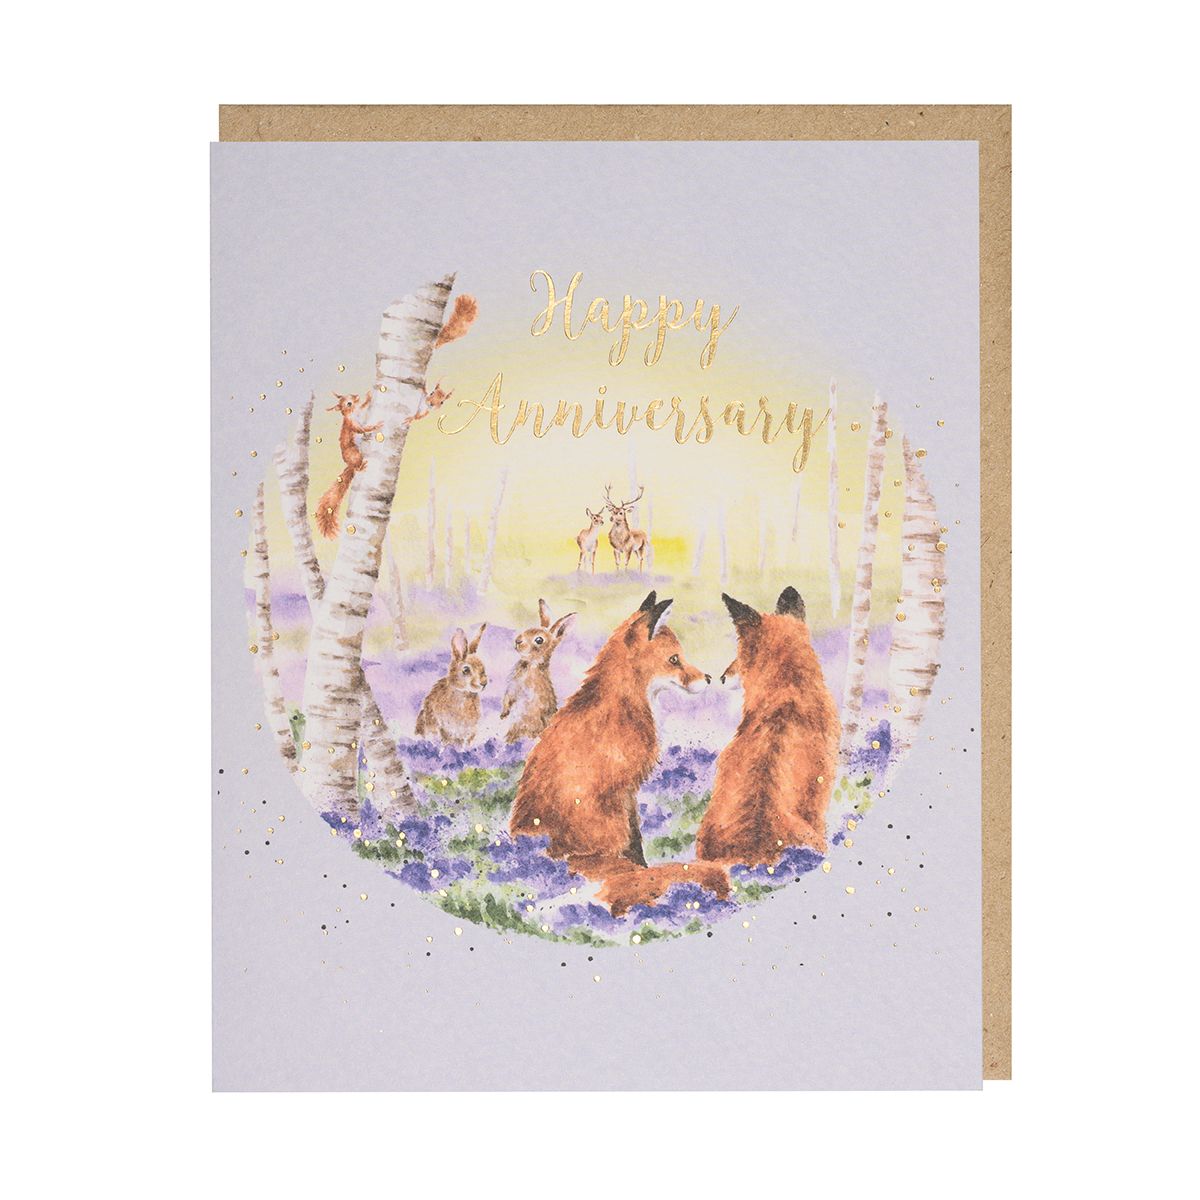 Wrendale Designs Bluebell Woods Anniversary Card